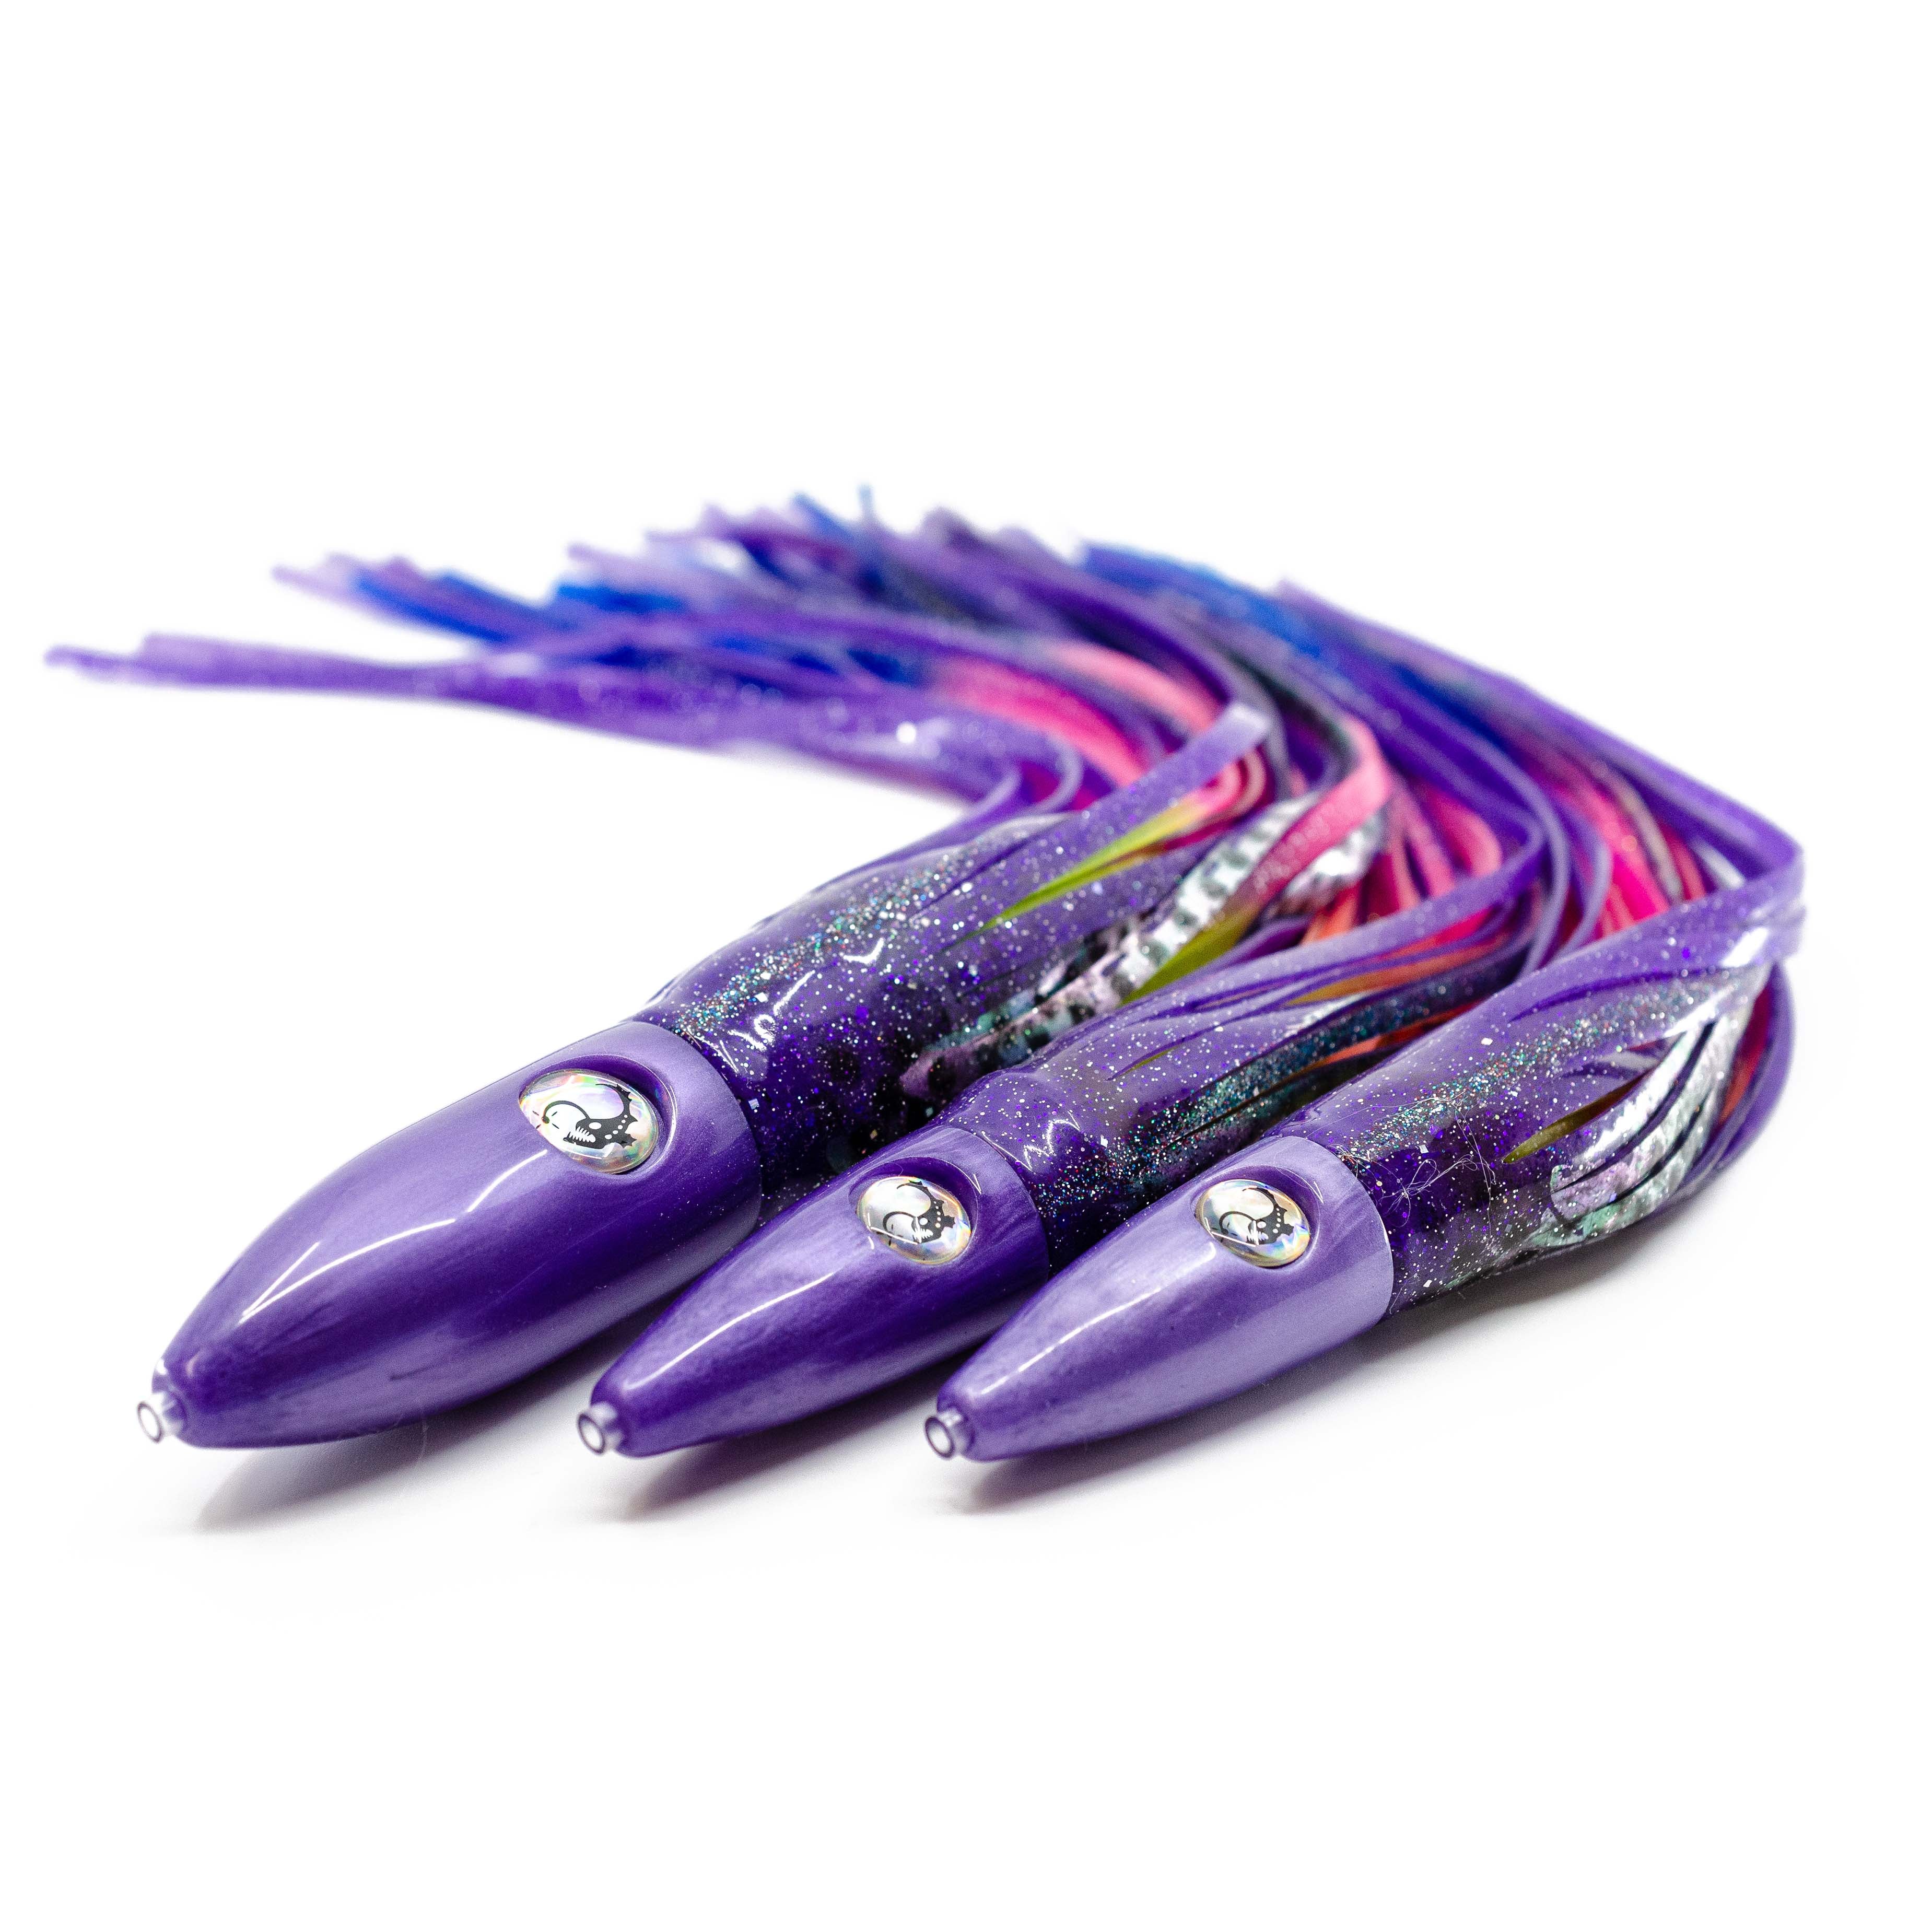 LURE'M IN: Custom Hand-Made Resin Trolling Lures for Offshore Fishing